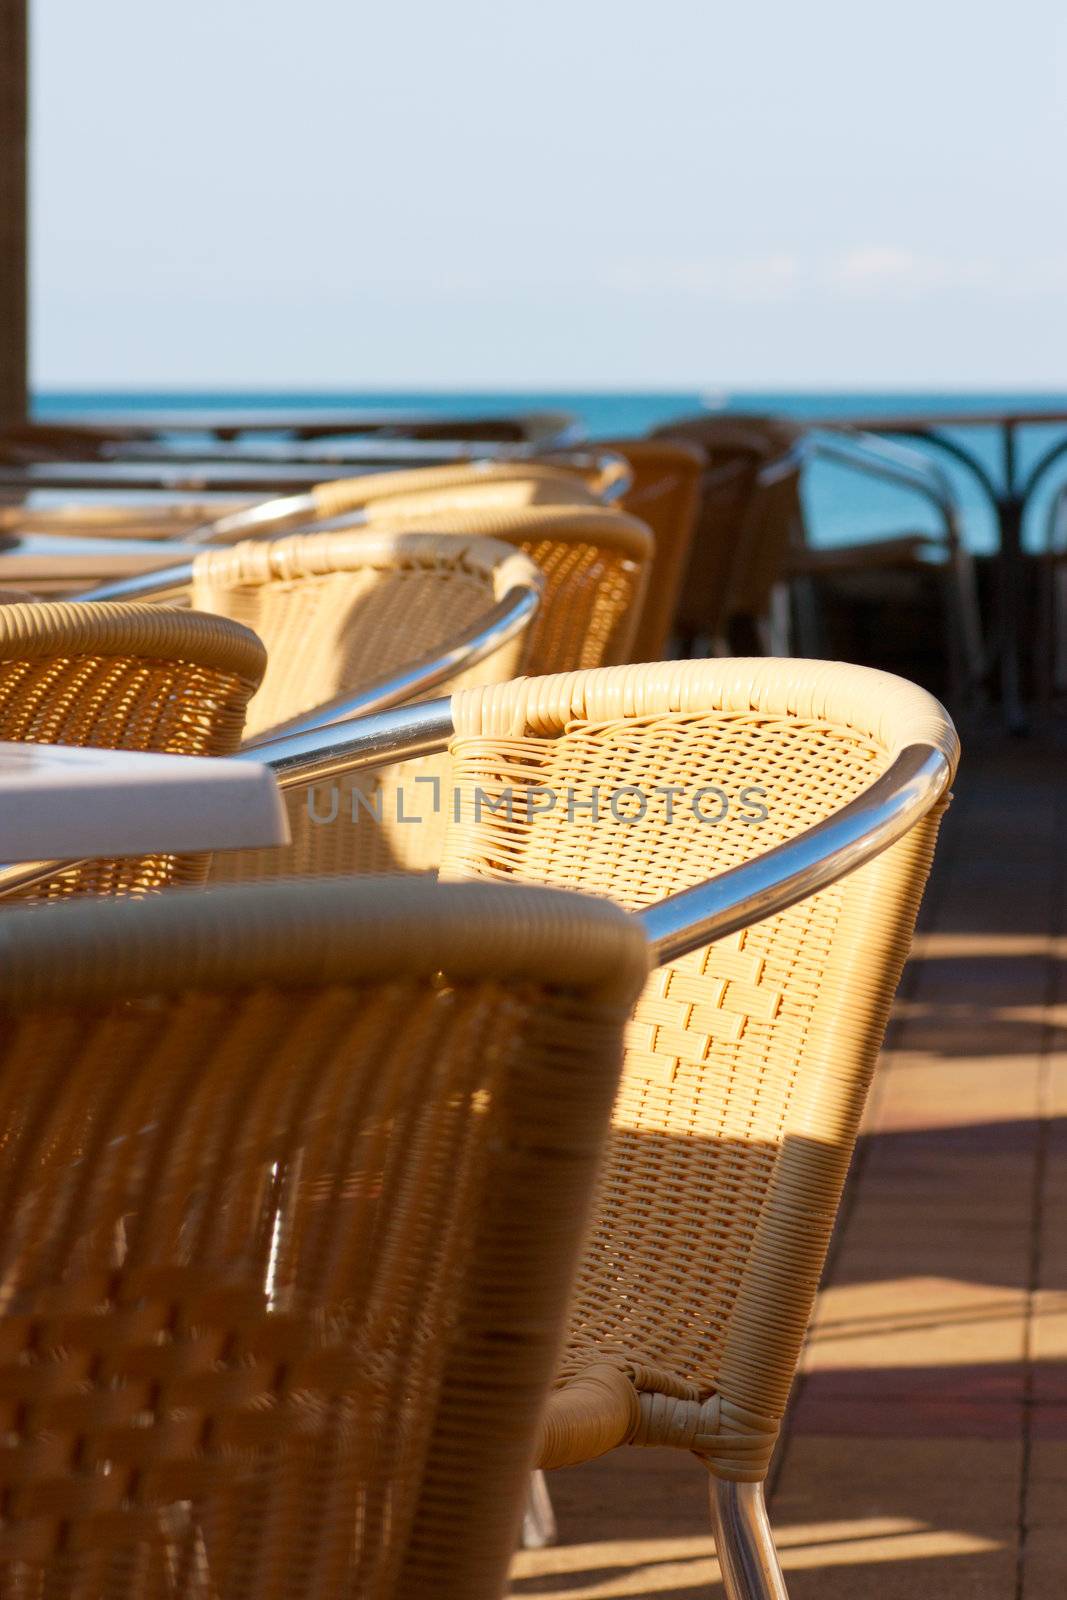 Chairs in a cafe on a seaside resort